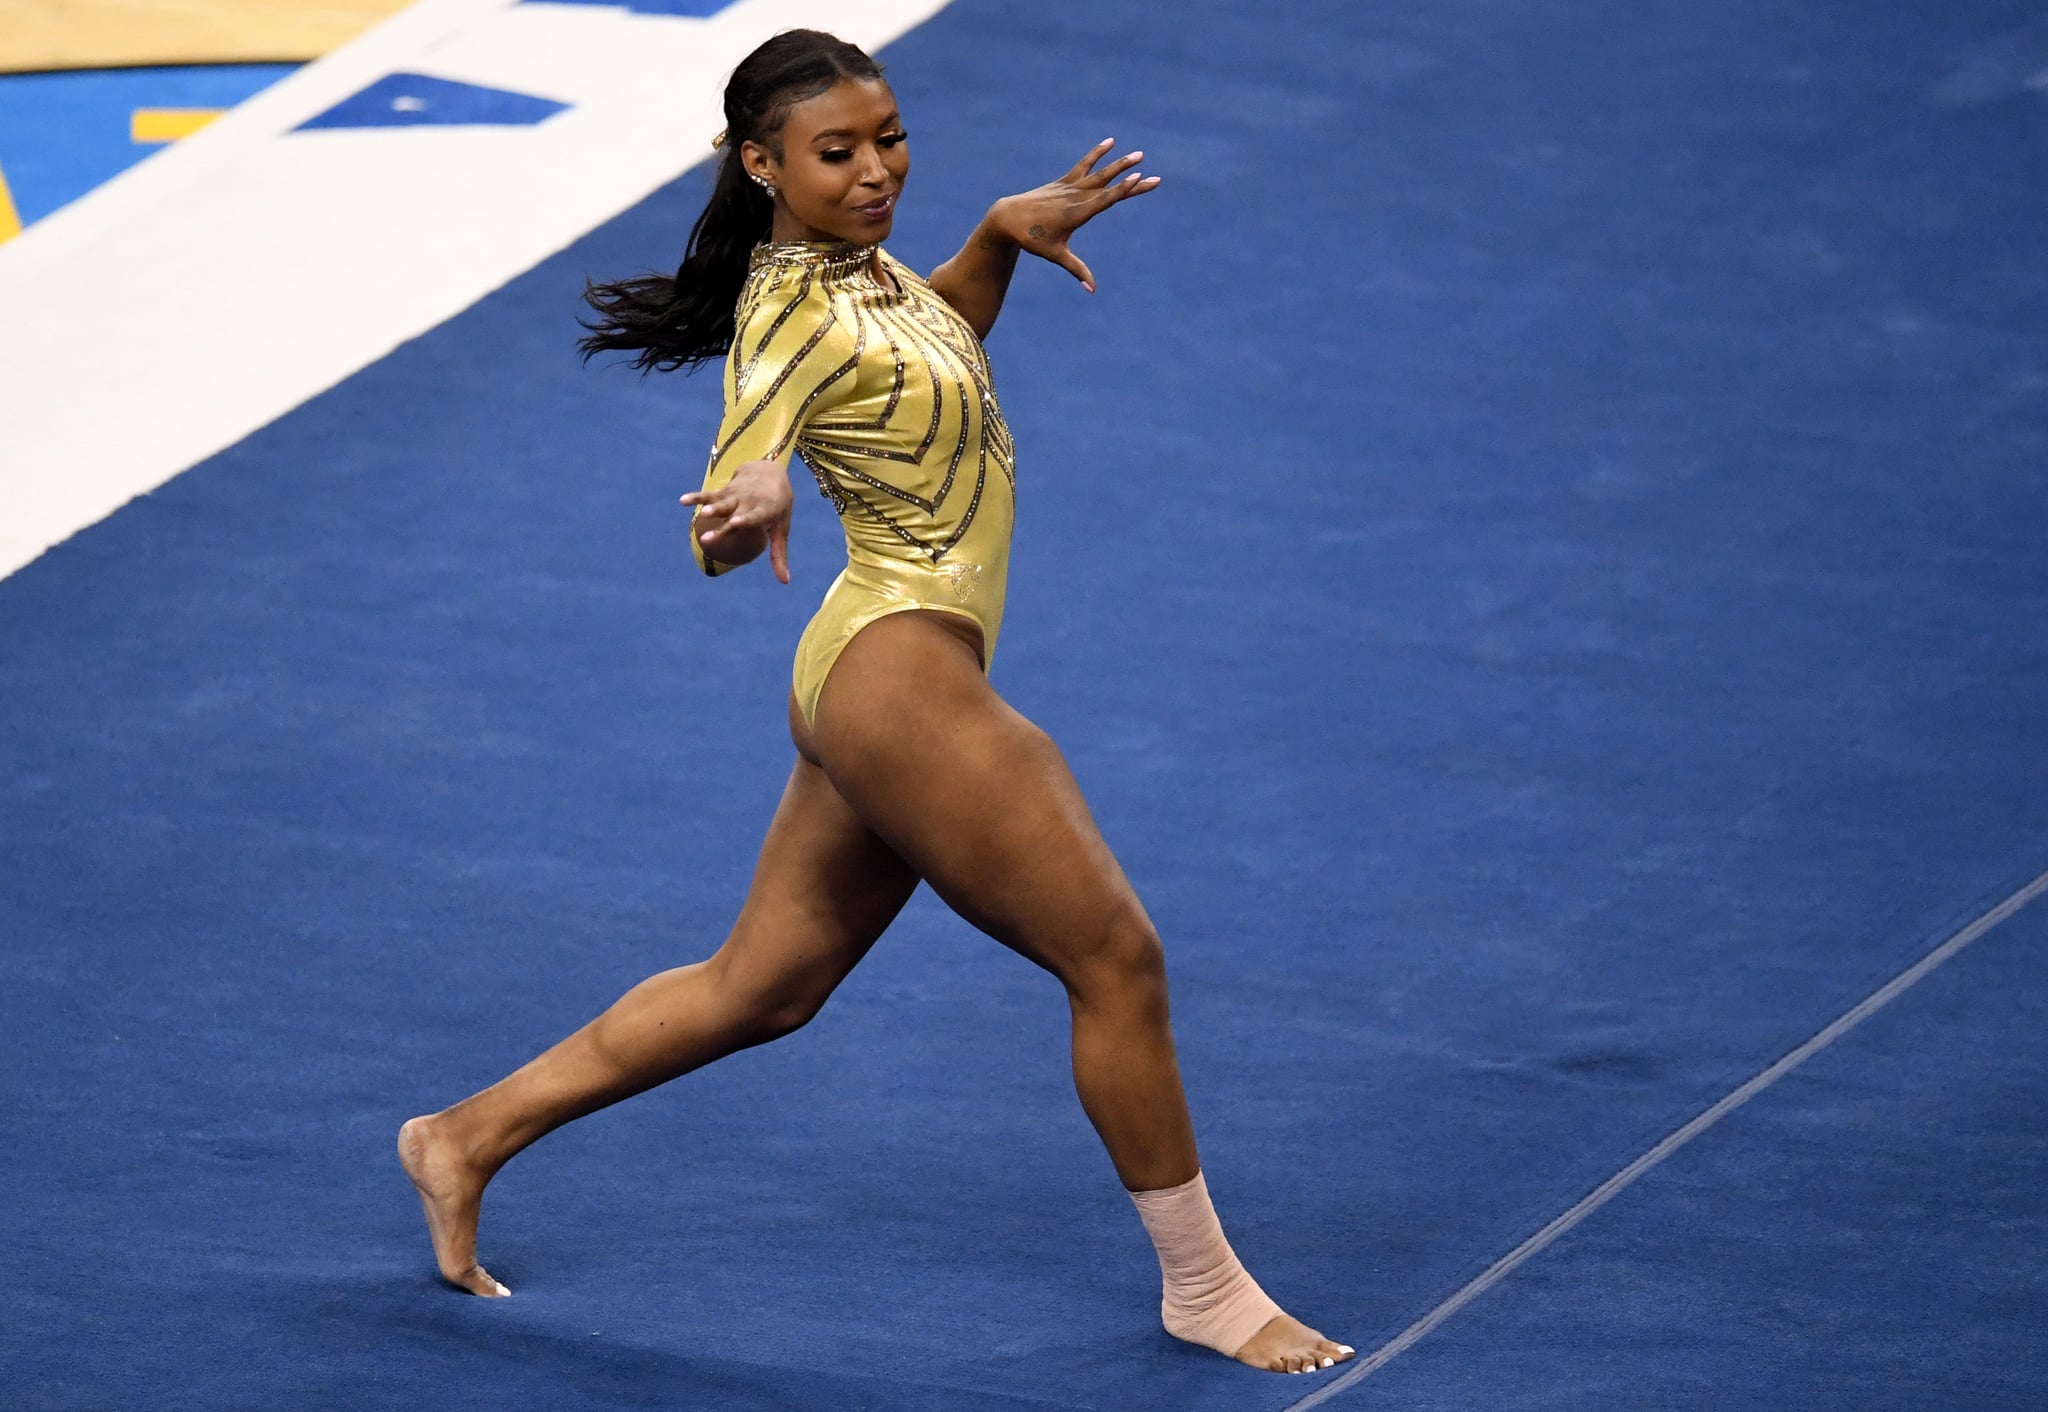 Los Angeles, CA - February 10:  UCLA Bruins gymnasts Nia Dennis competes in the floor exercise against BYU during a gymnastics meet in Pauley Pavilion on the campus of UCLA in Los Angeles on Wednesday, February 10, 2021. (Photo by Keith Birmingham/MediaNews Group/Pasadena Star-News via Getty Images)